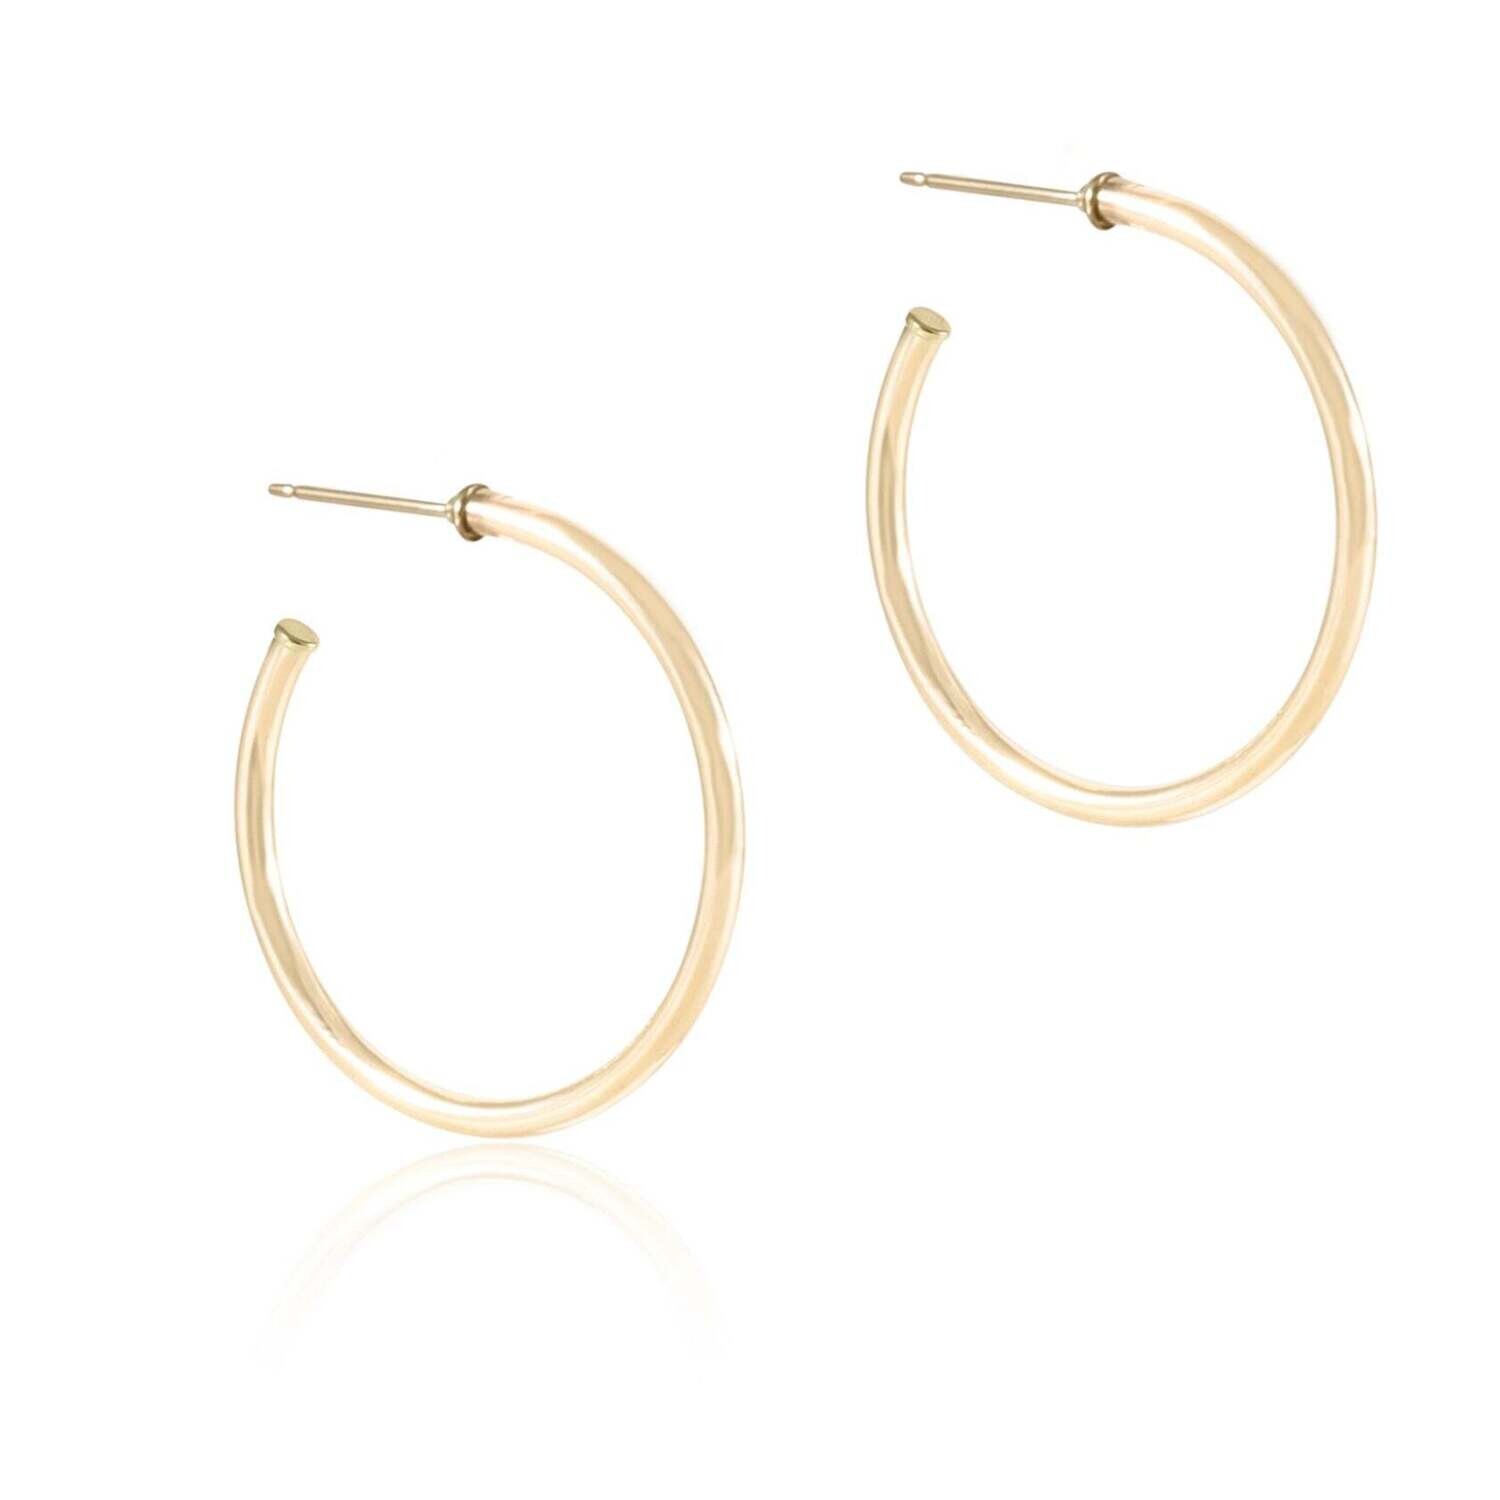  Smooth Round Gold 1.5 Post Hoop